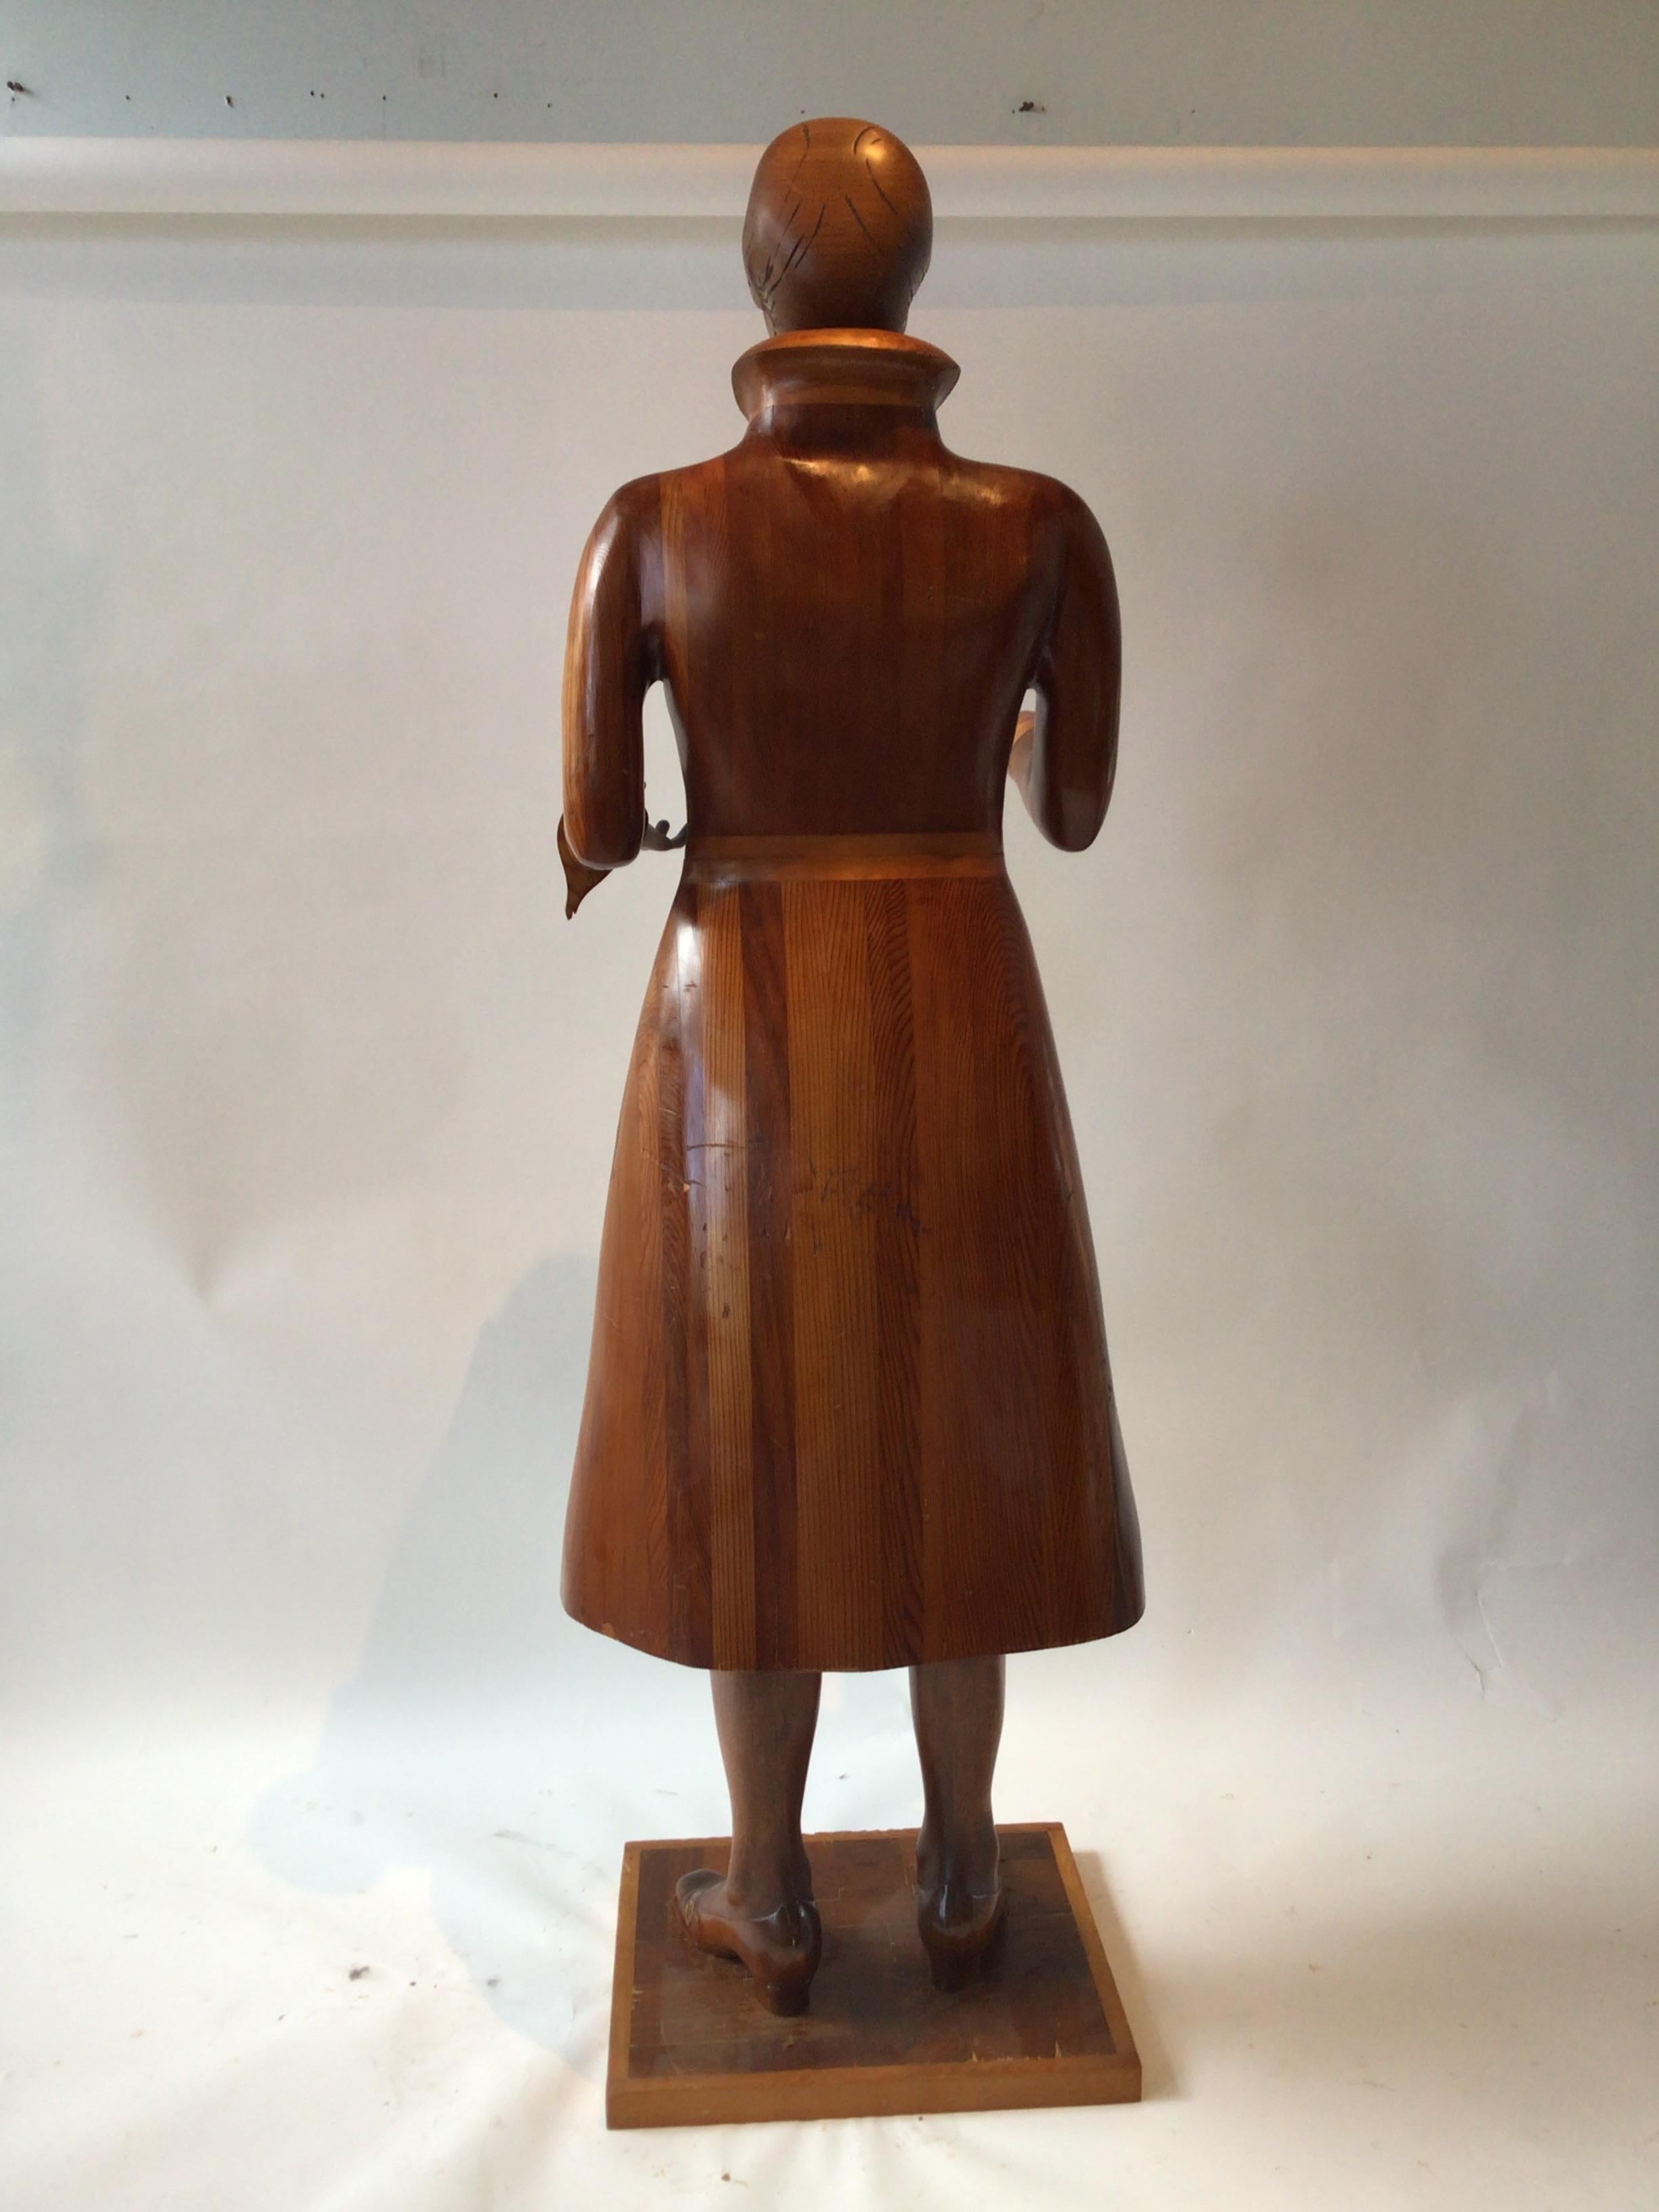 Life Size Wood Sculpture of 1950s Female Homemaker For Sale 2